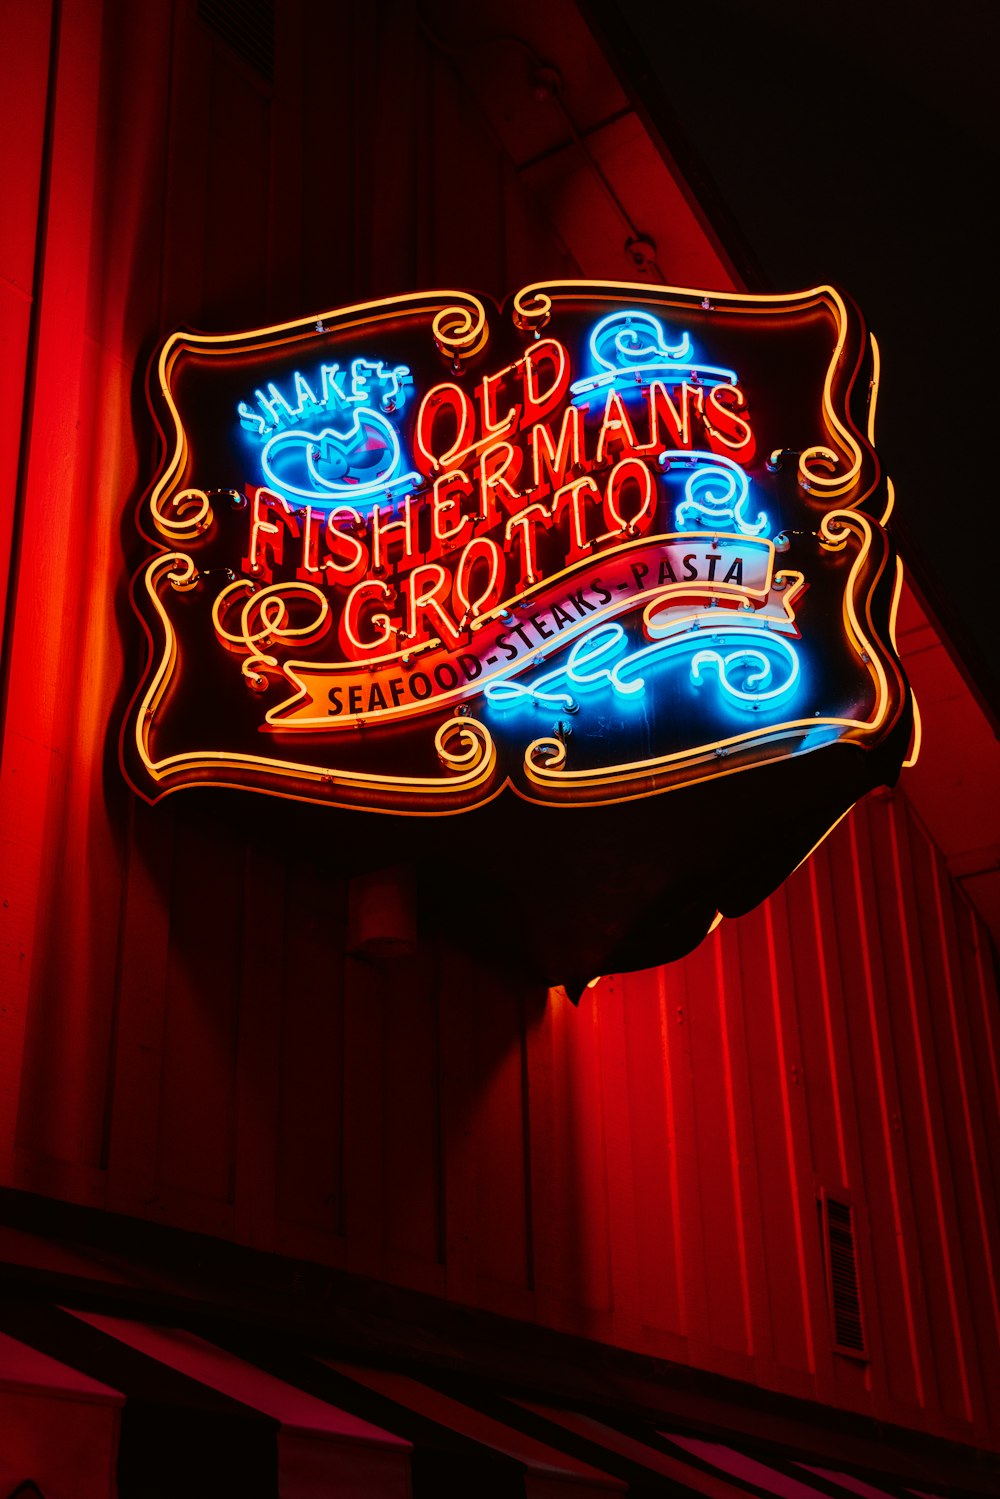 old fisherman's grotto neon sign